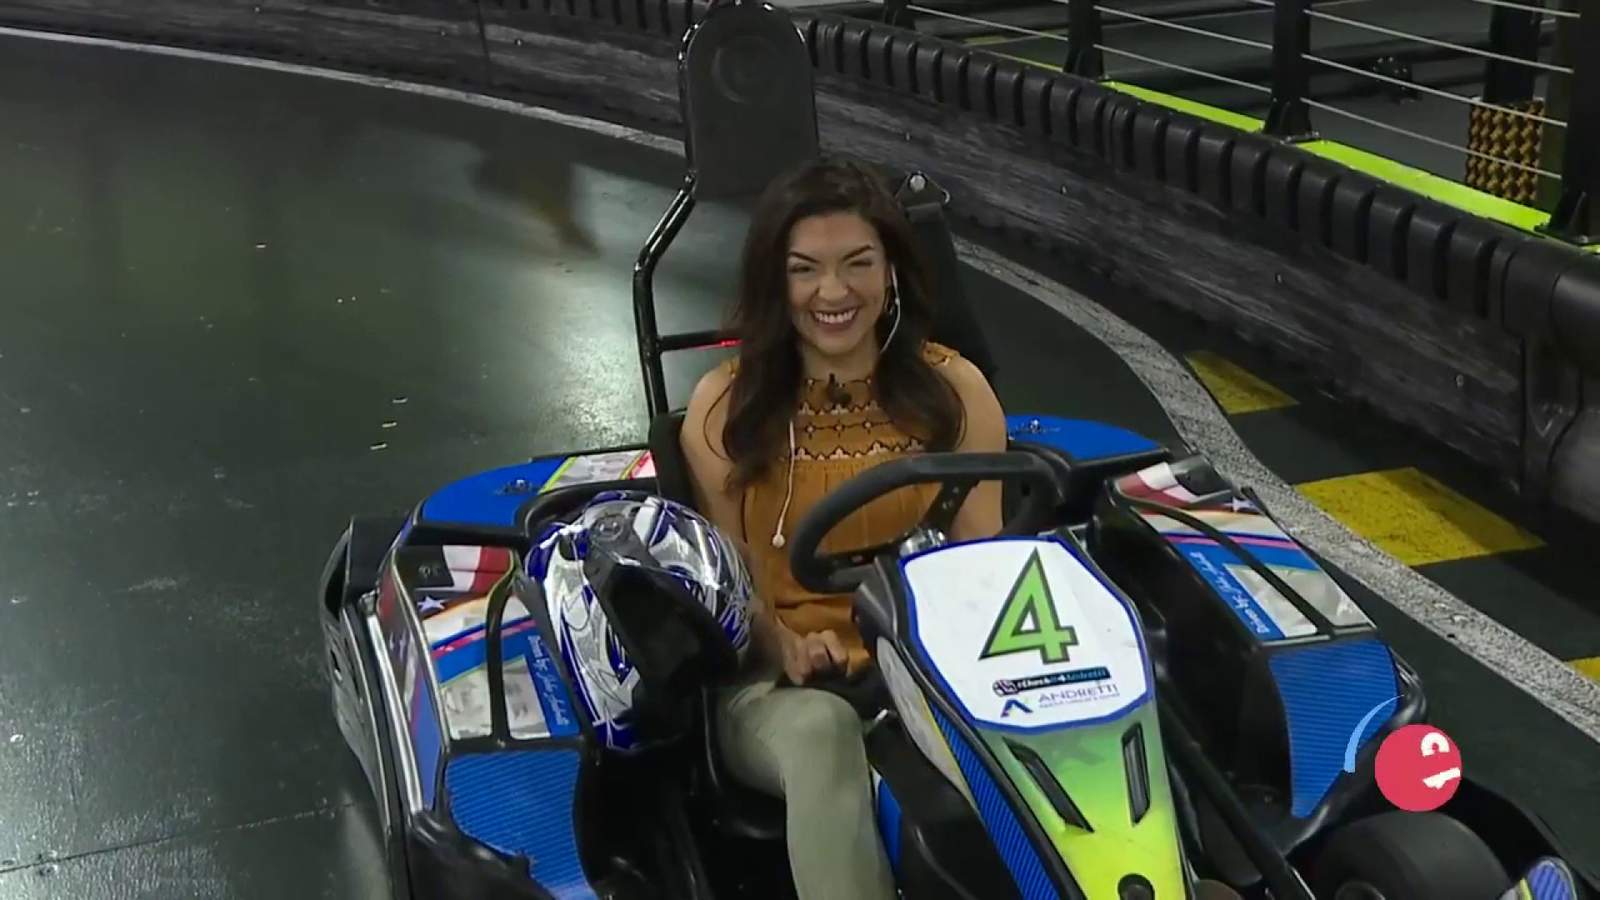 Ready, set, race! Andretti Indoor Karting & Gaming reopens with safety, social distancing in mind